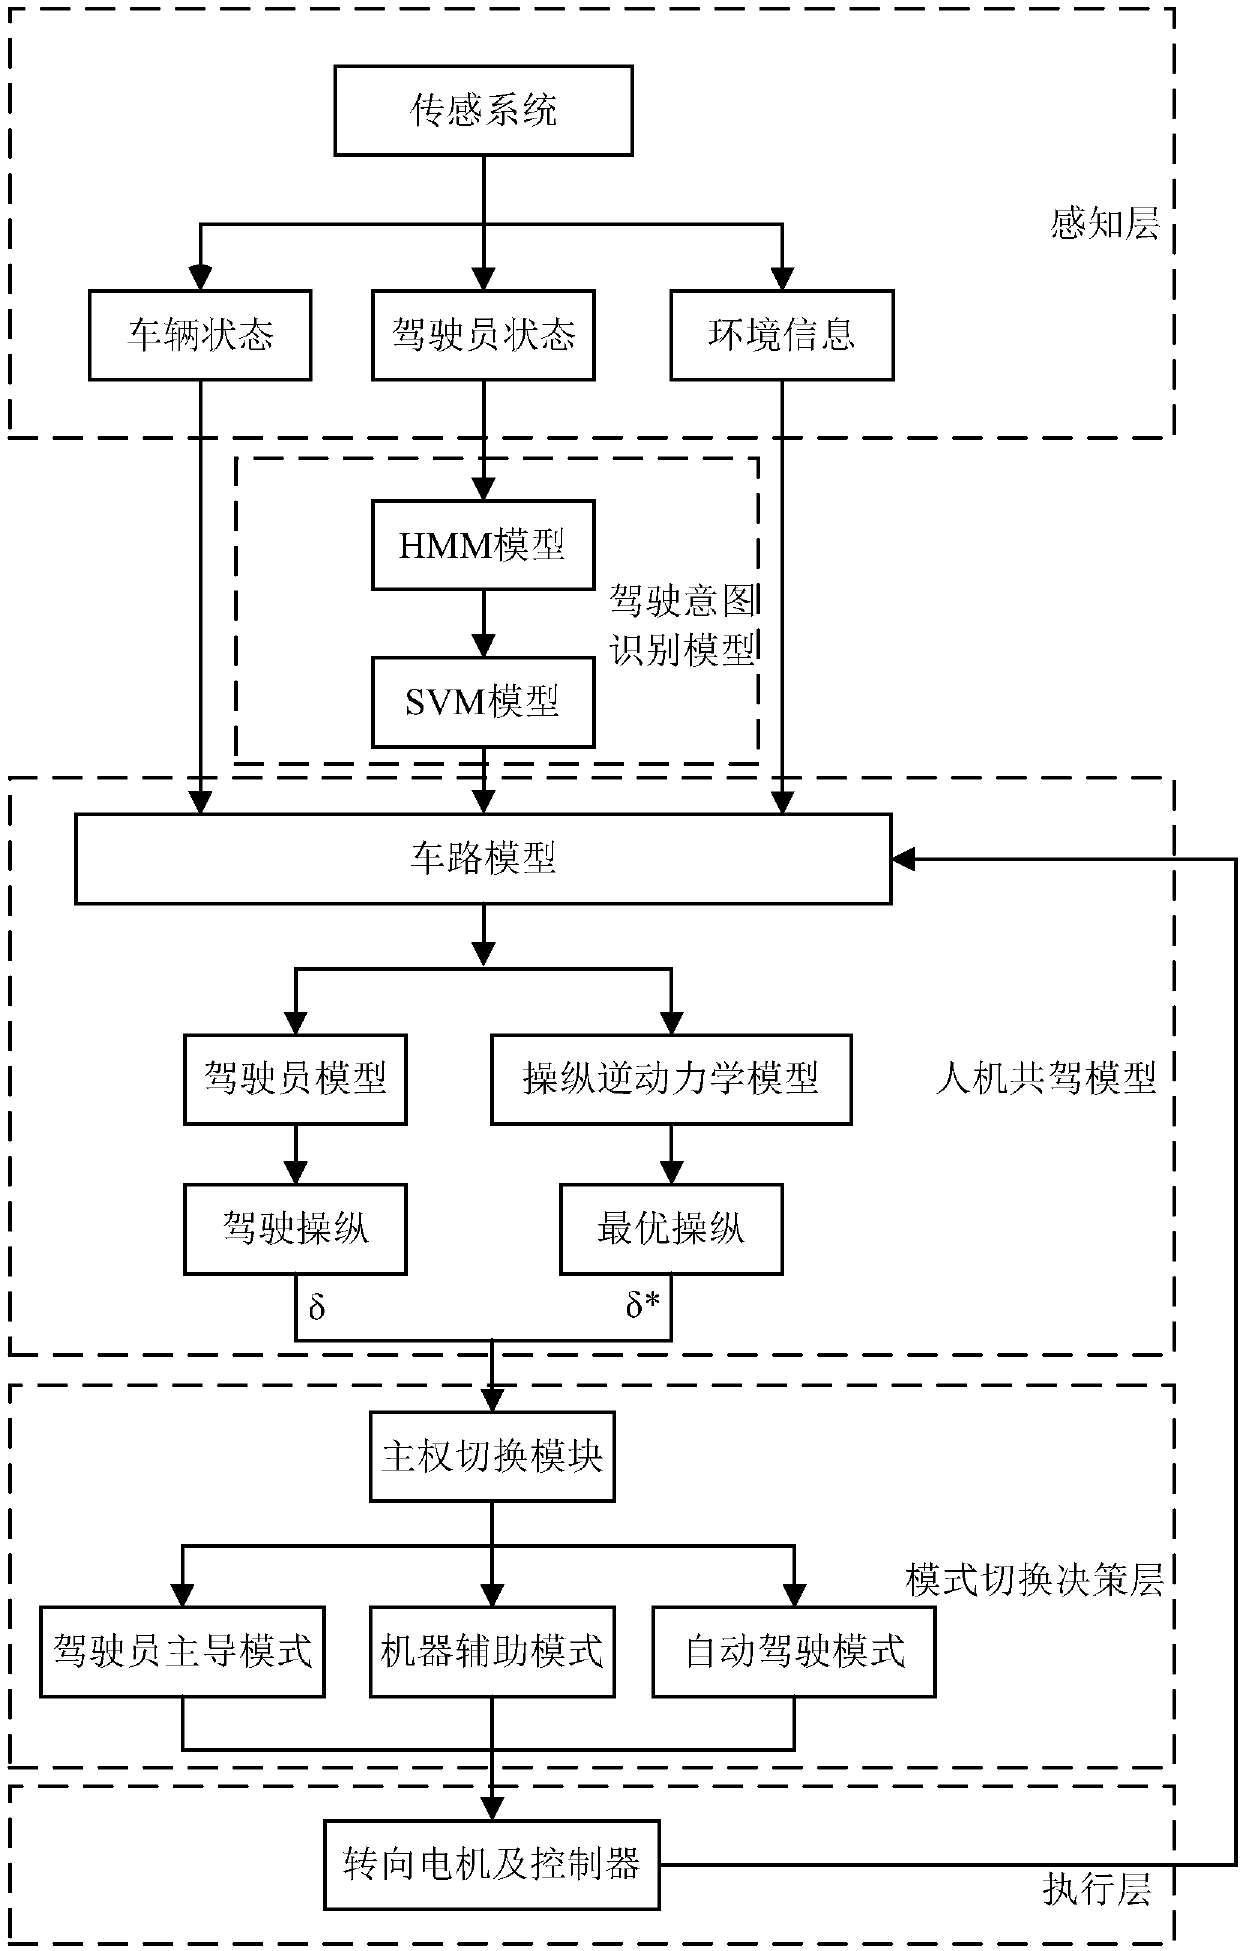 Man-machine co-driving control system based on driver model and handling inverse dynamics and switching mode of man-machine co-driving control system